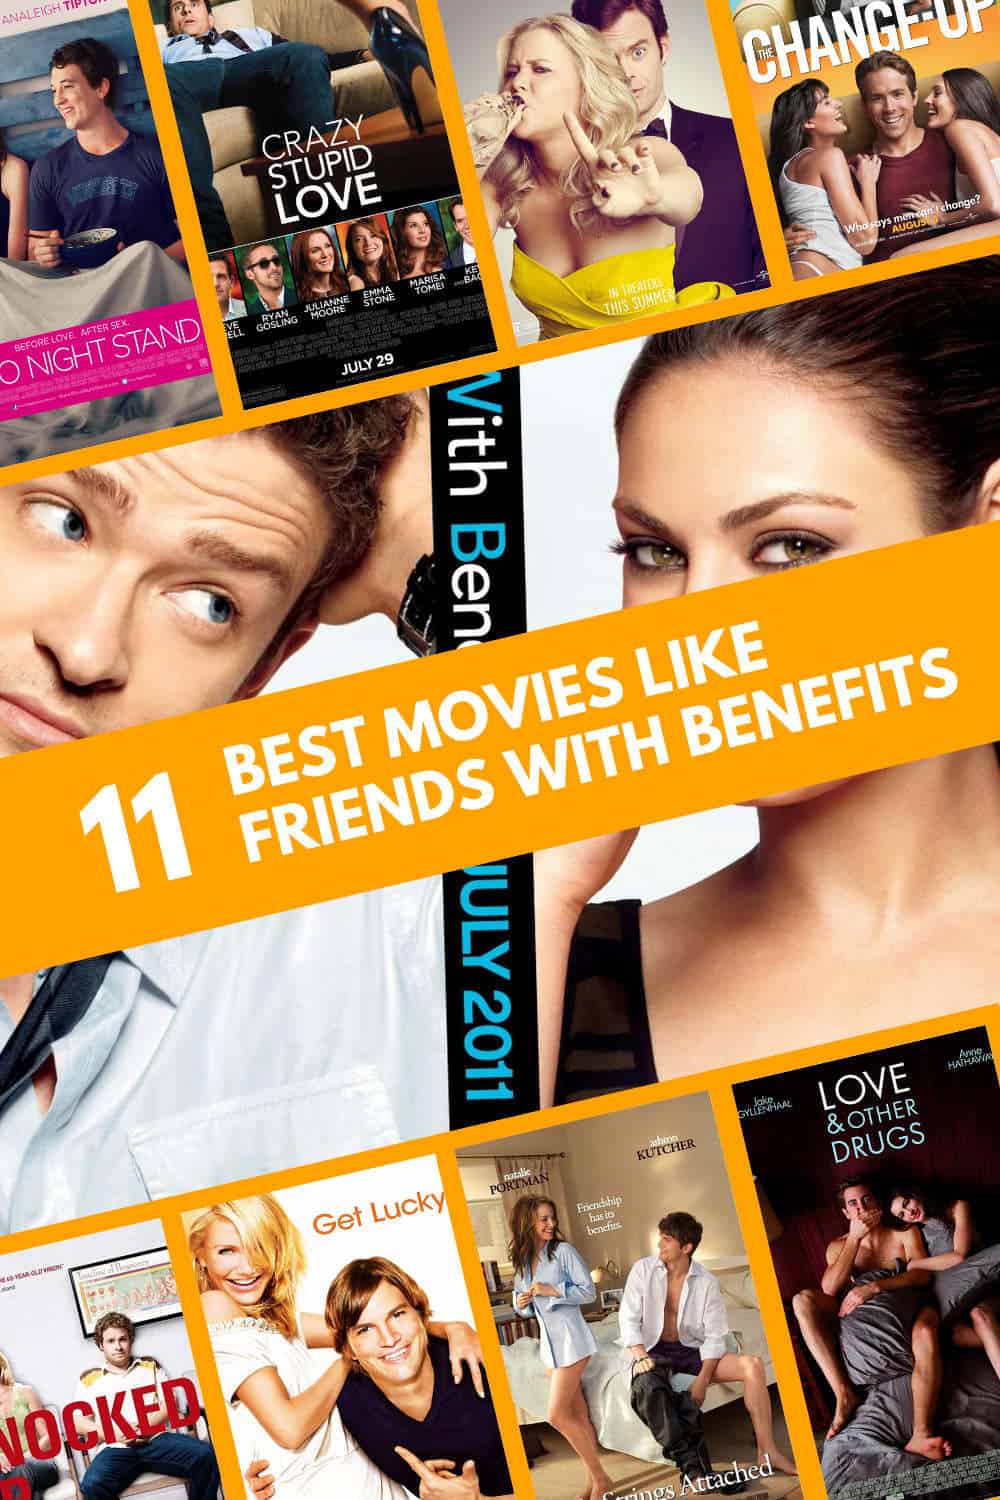 Movie Like Friends With Benefits